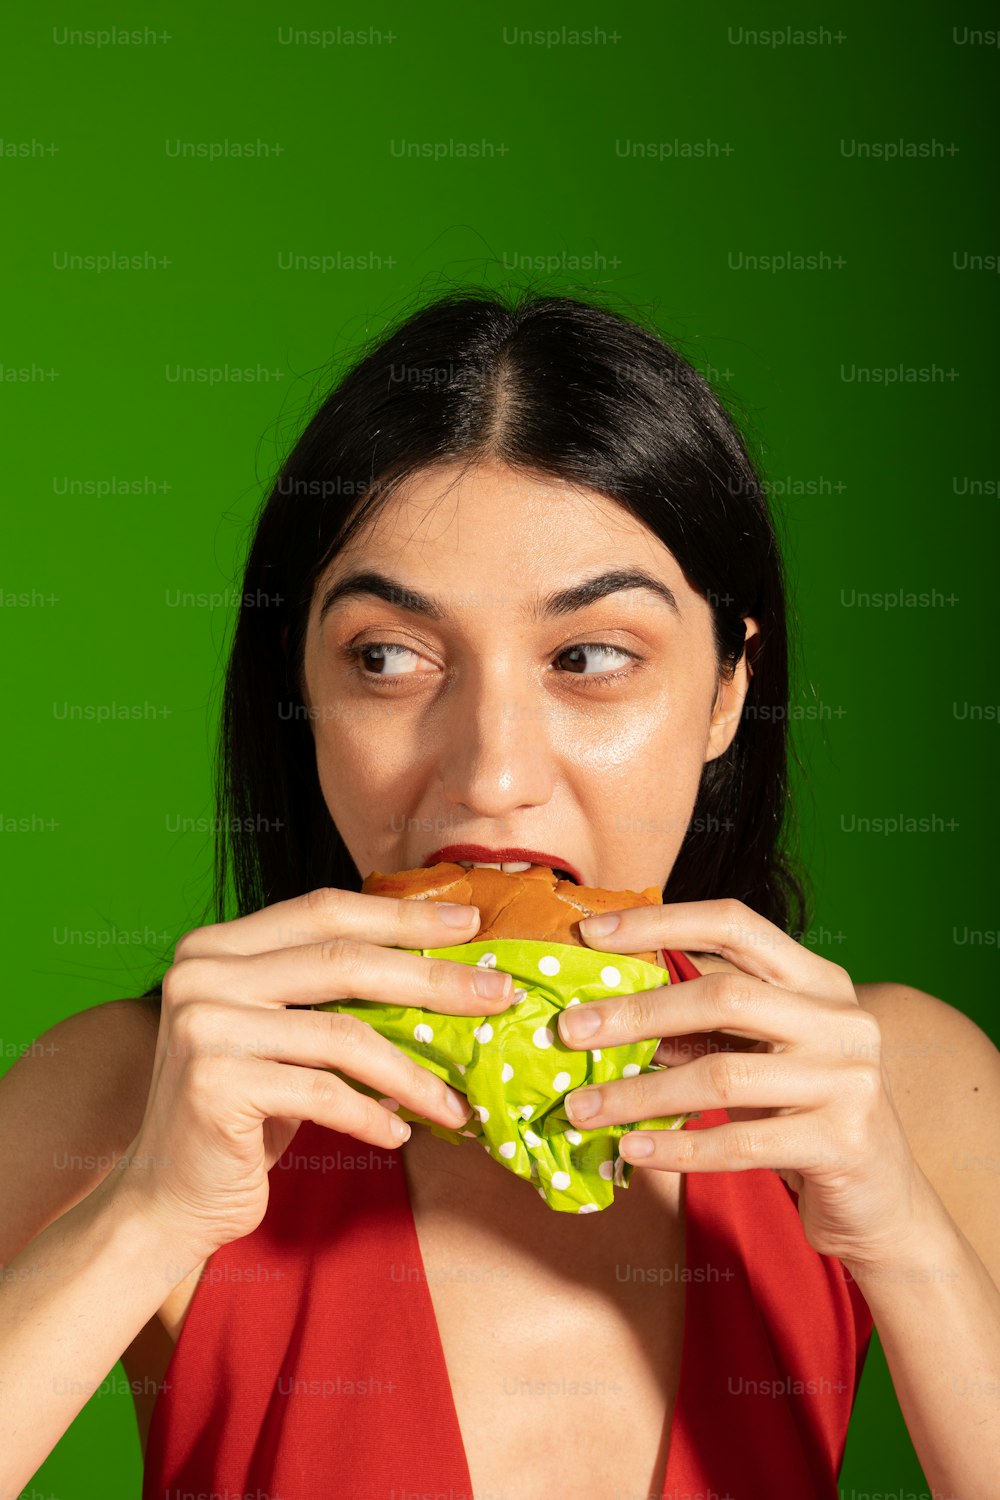 a woman in a red dress eating a sandwich